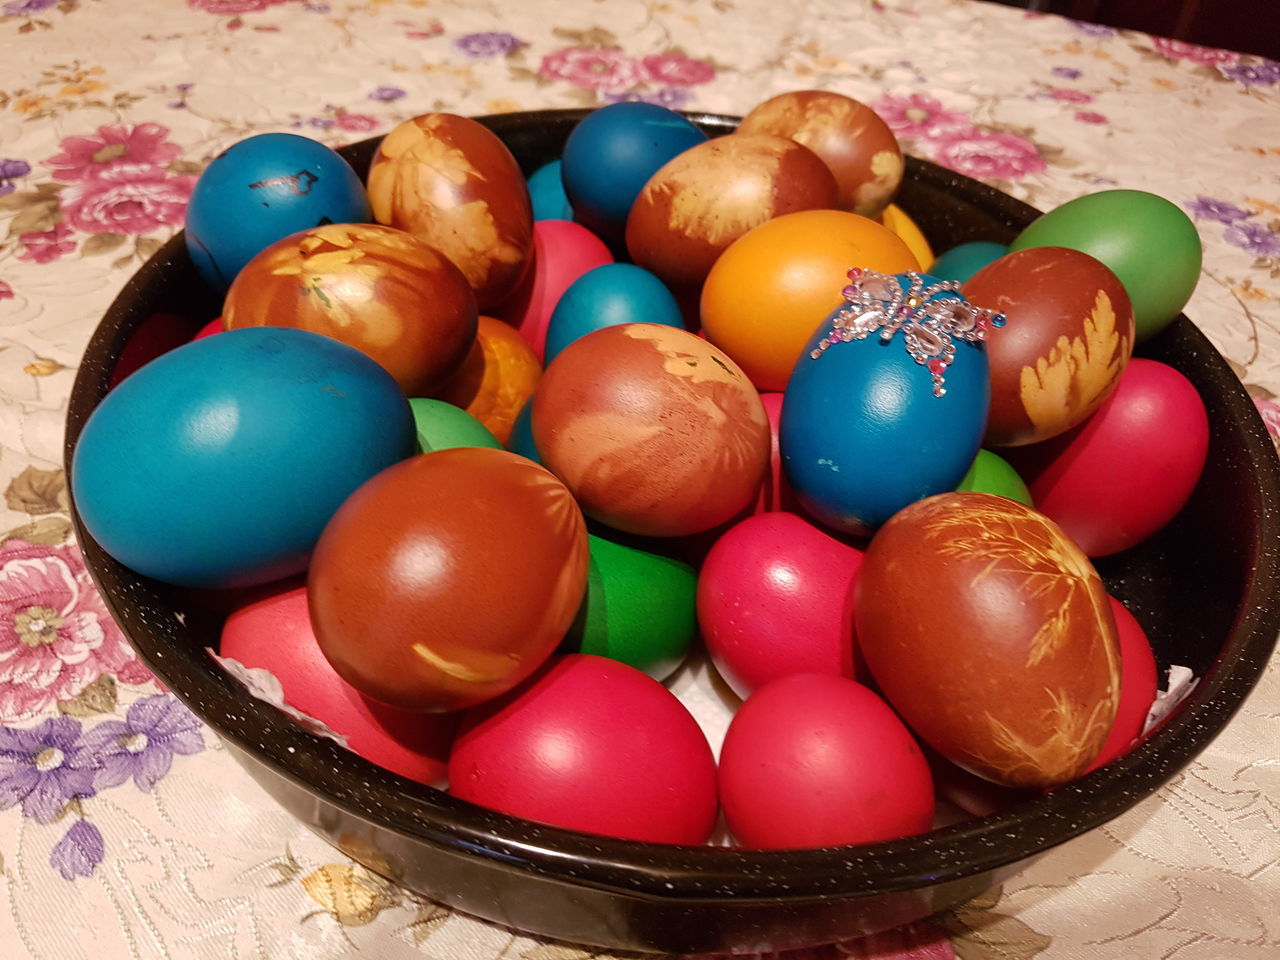 easter, food, tradition, easter egg, celebration, multi colored, egg, holiday, food and drink, no people, indoors, still life, decoration, event, high angle view, religion, container, close-up, table, large group of objects, belief, vibrant color, sweet food